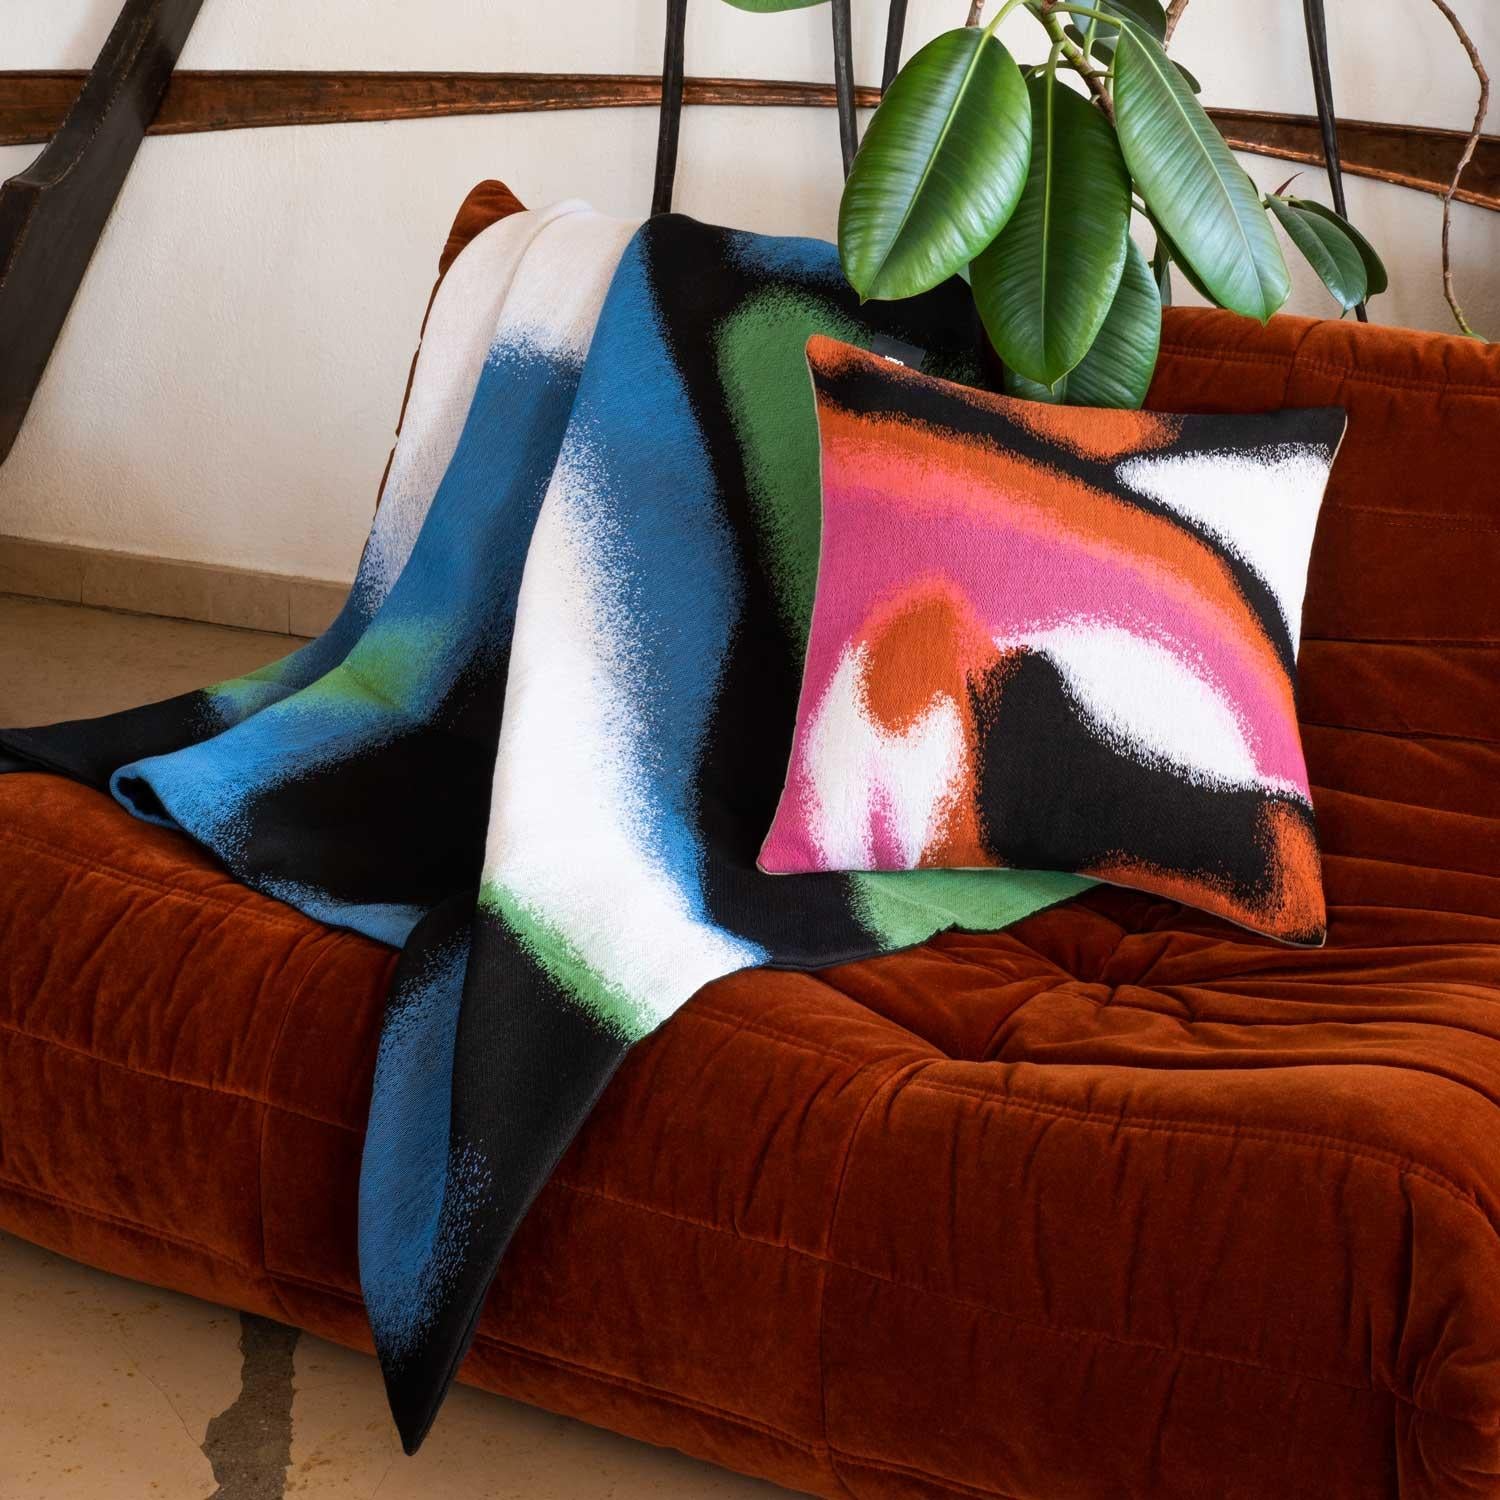 Our tapestry blankets turns textile to art. A meticulously crafted three-layer jacquard produced in France, this weave is finished expertly by hand to create a subtle three-dimensional effect. In either a groovy pink and red color combination or the